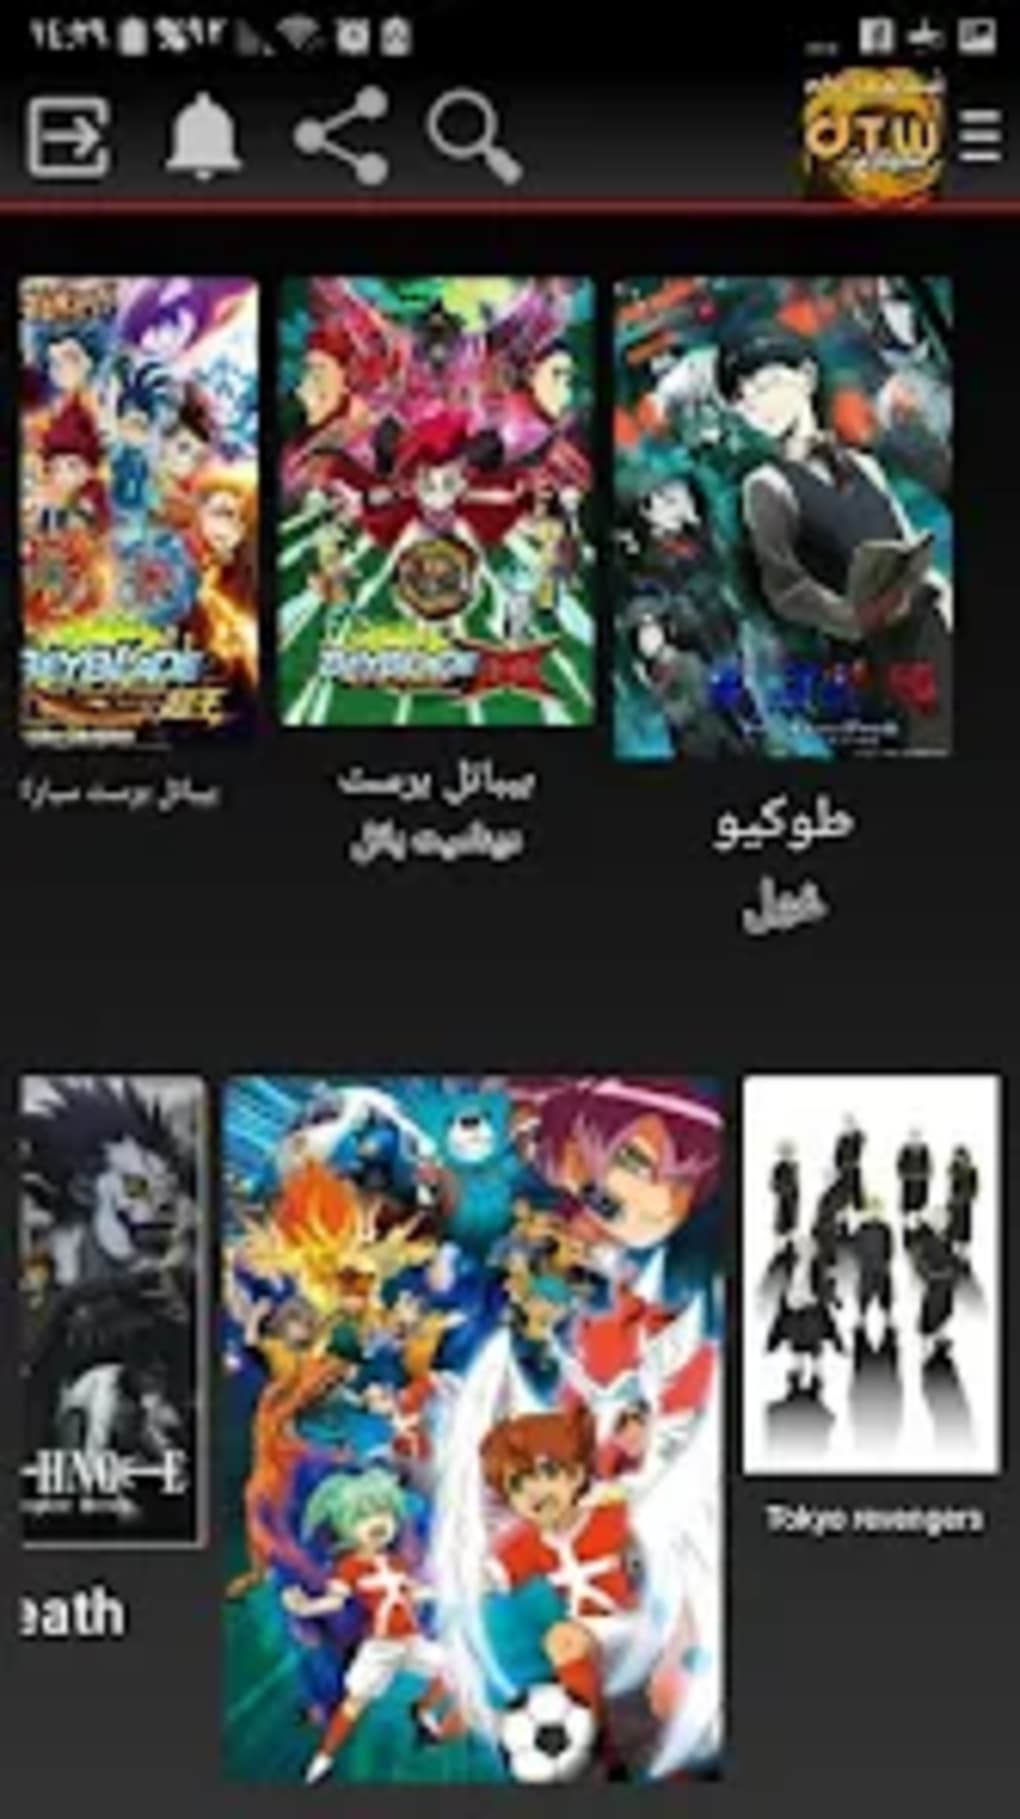 Dtw anime for Android - Download